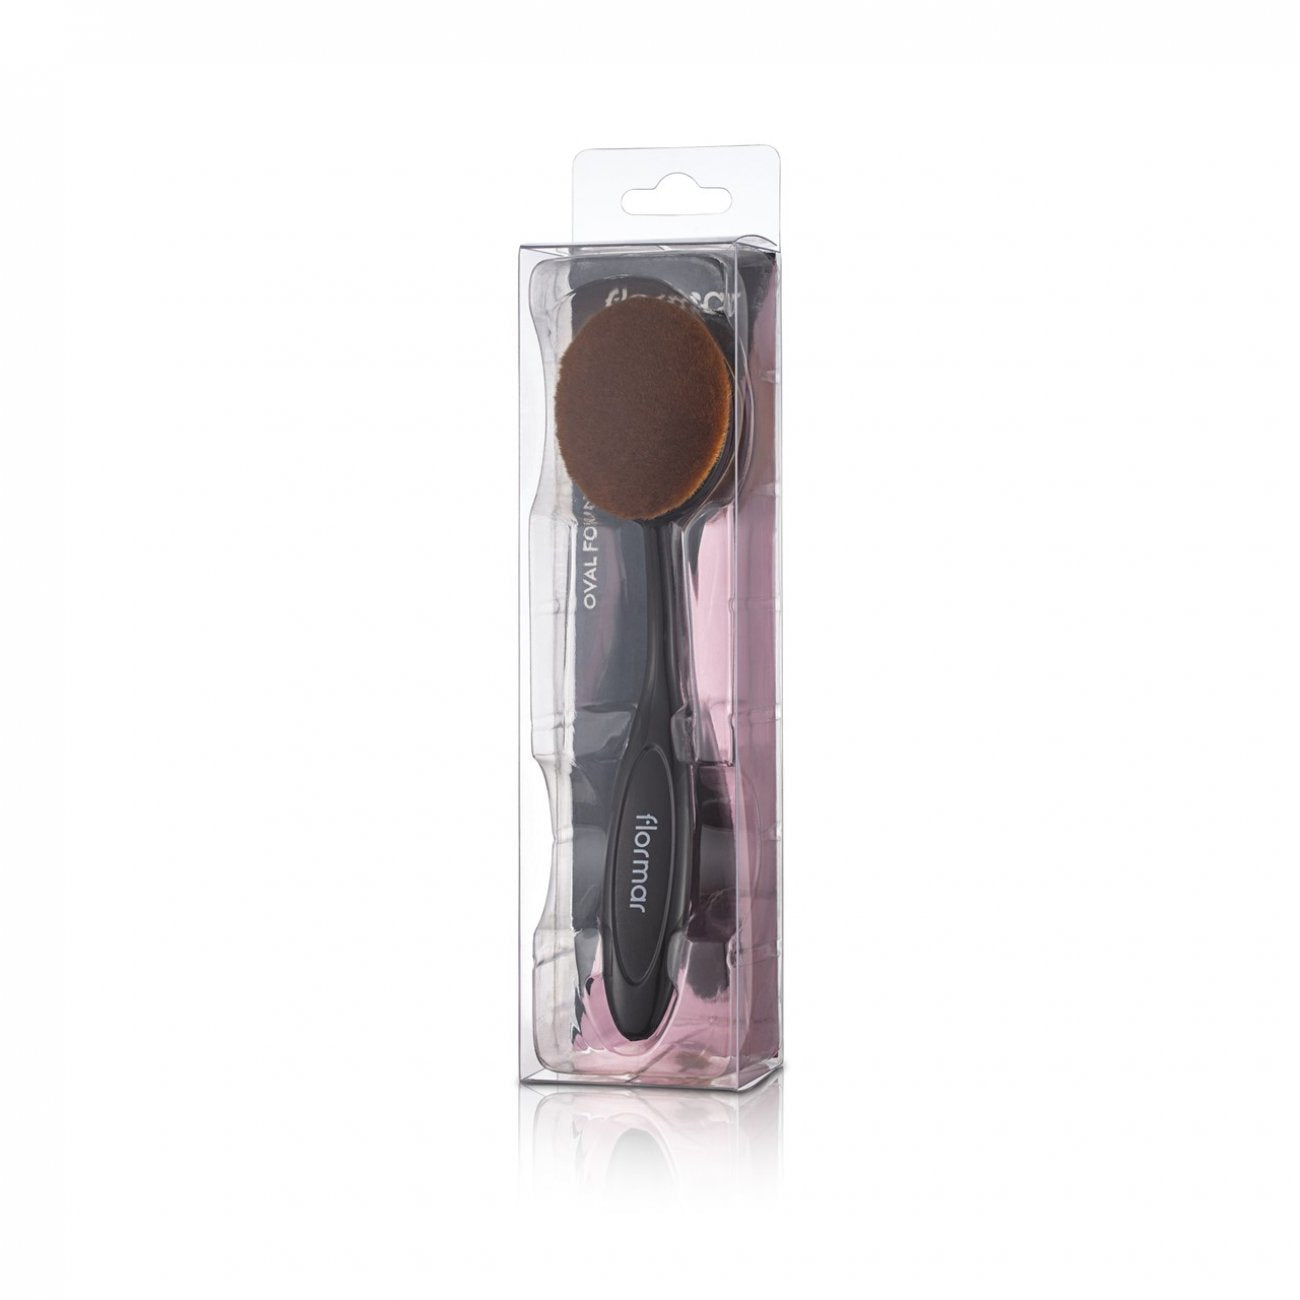 Oval Foundation Brush Redesign